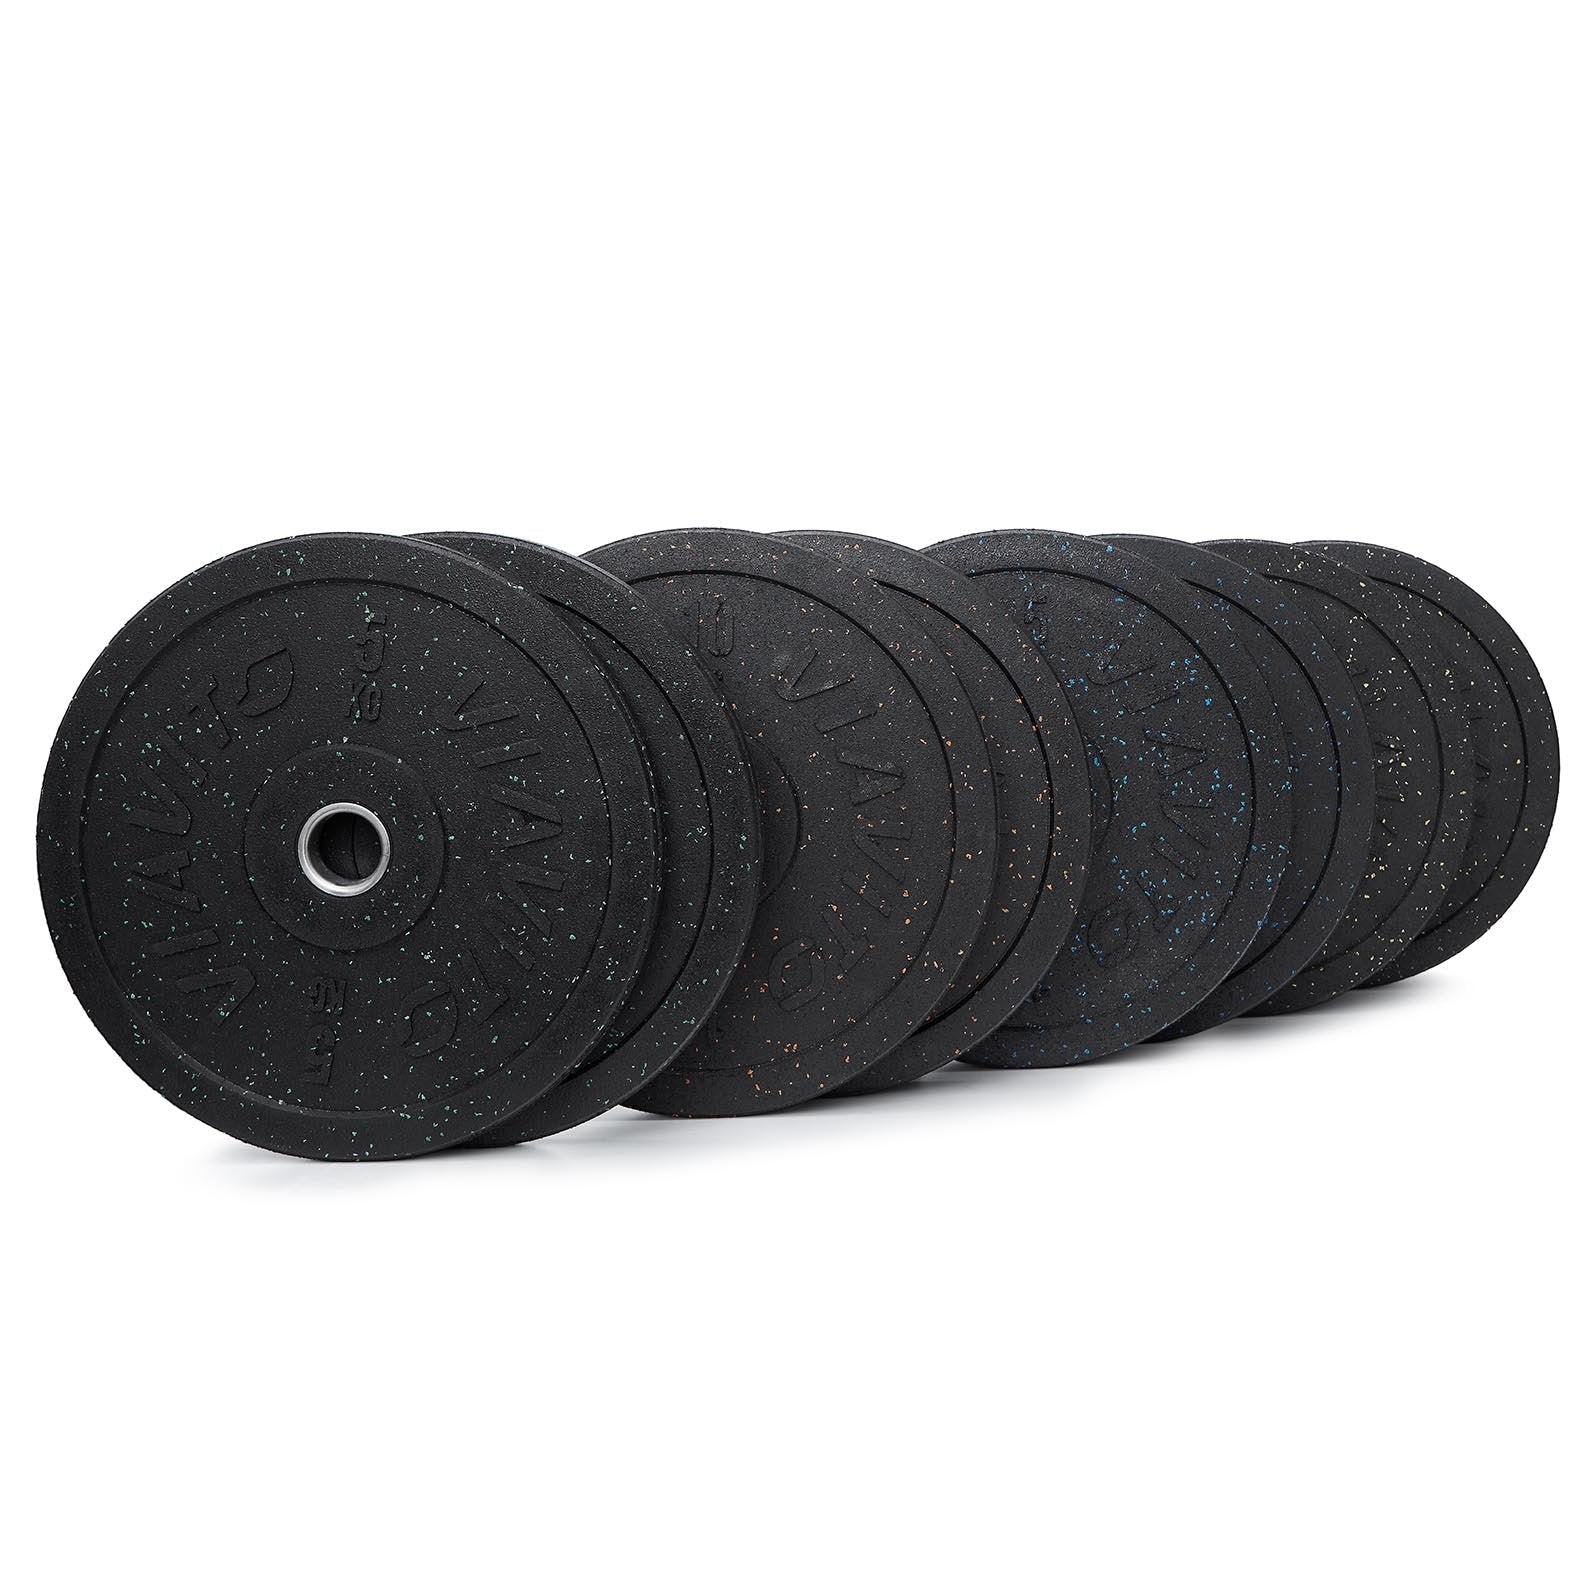 |Viavito Rubber Crumb Bumper Olympic 110kg Weight Plates Set|